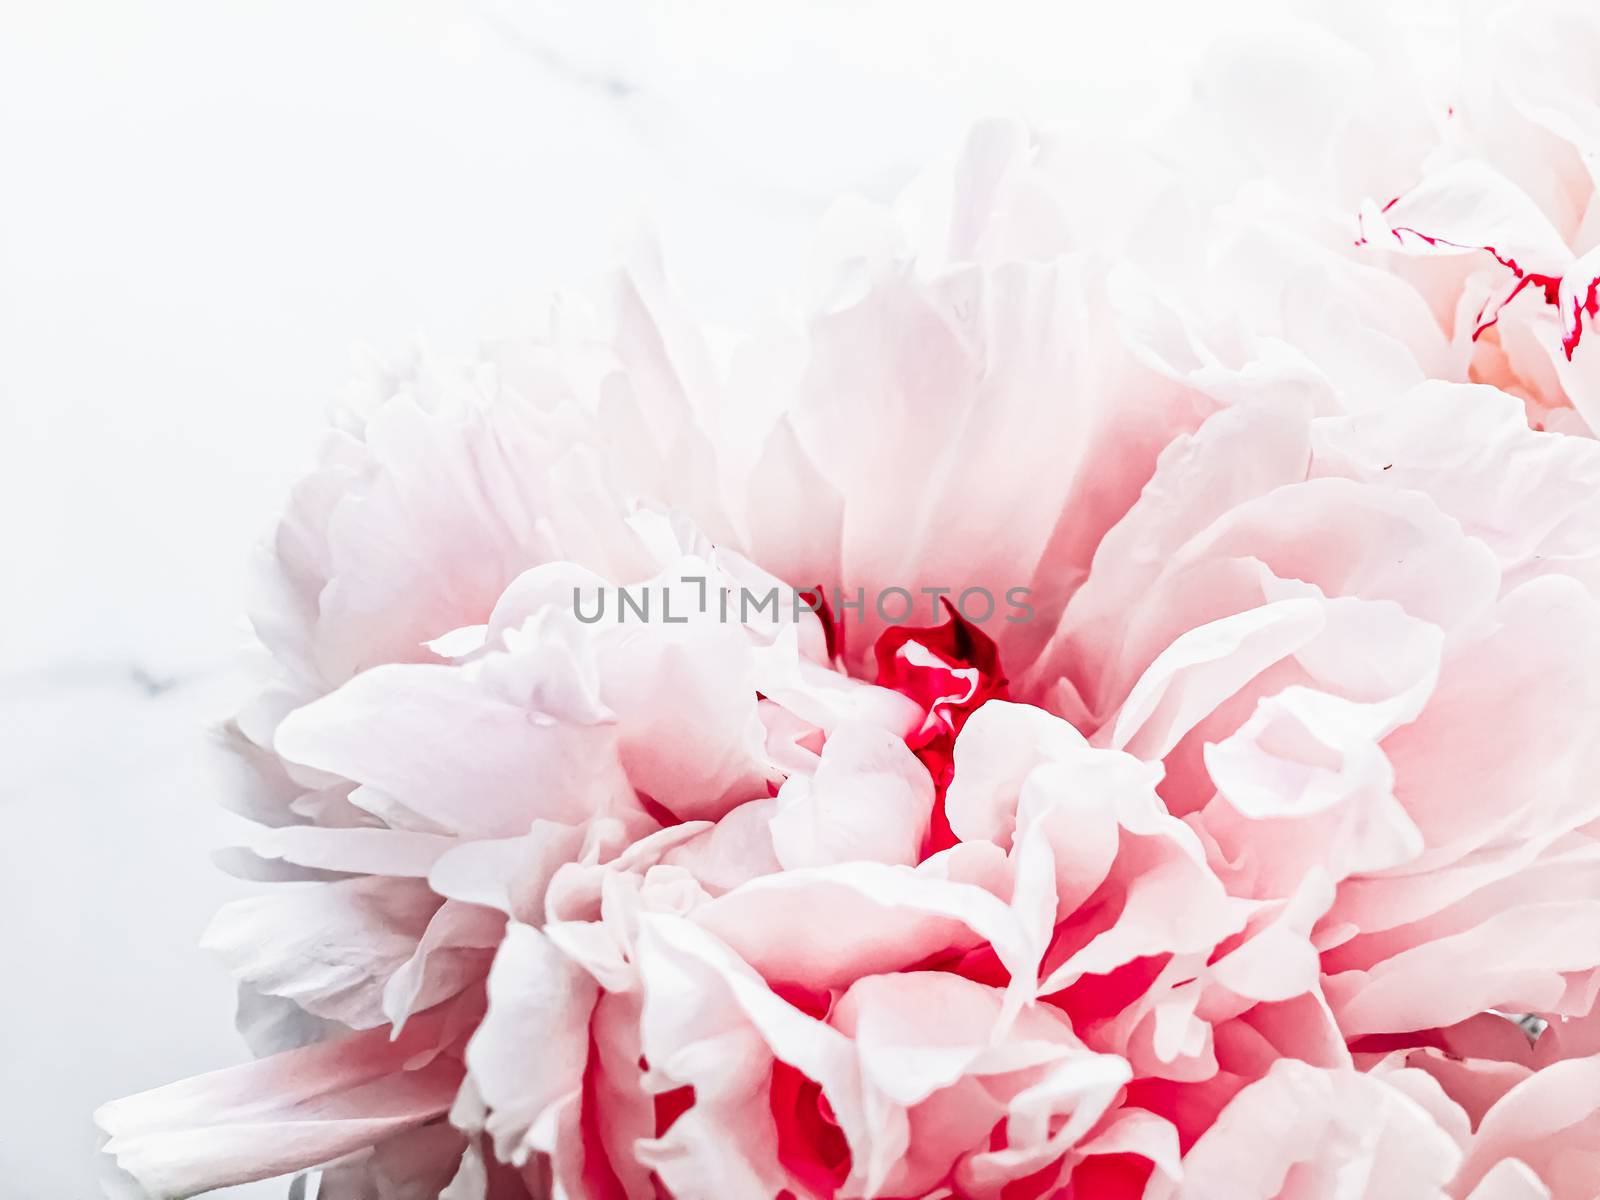 Bouquet of peony flowers on luxury marble background, wedding flatlay and event branding by Anneleven